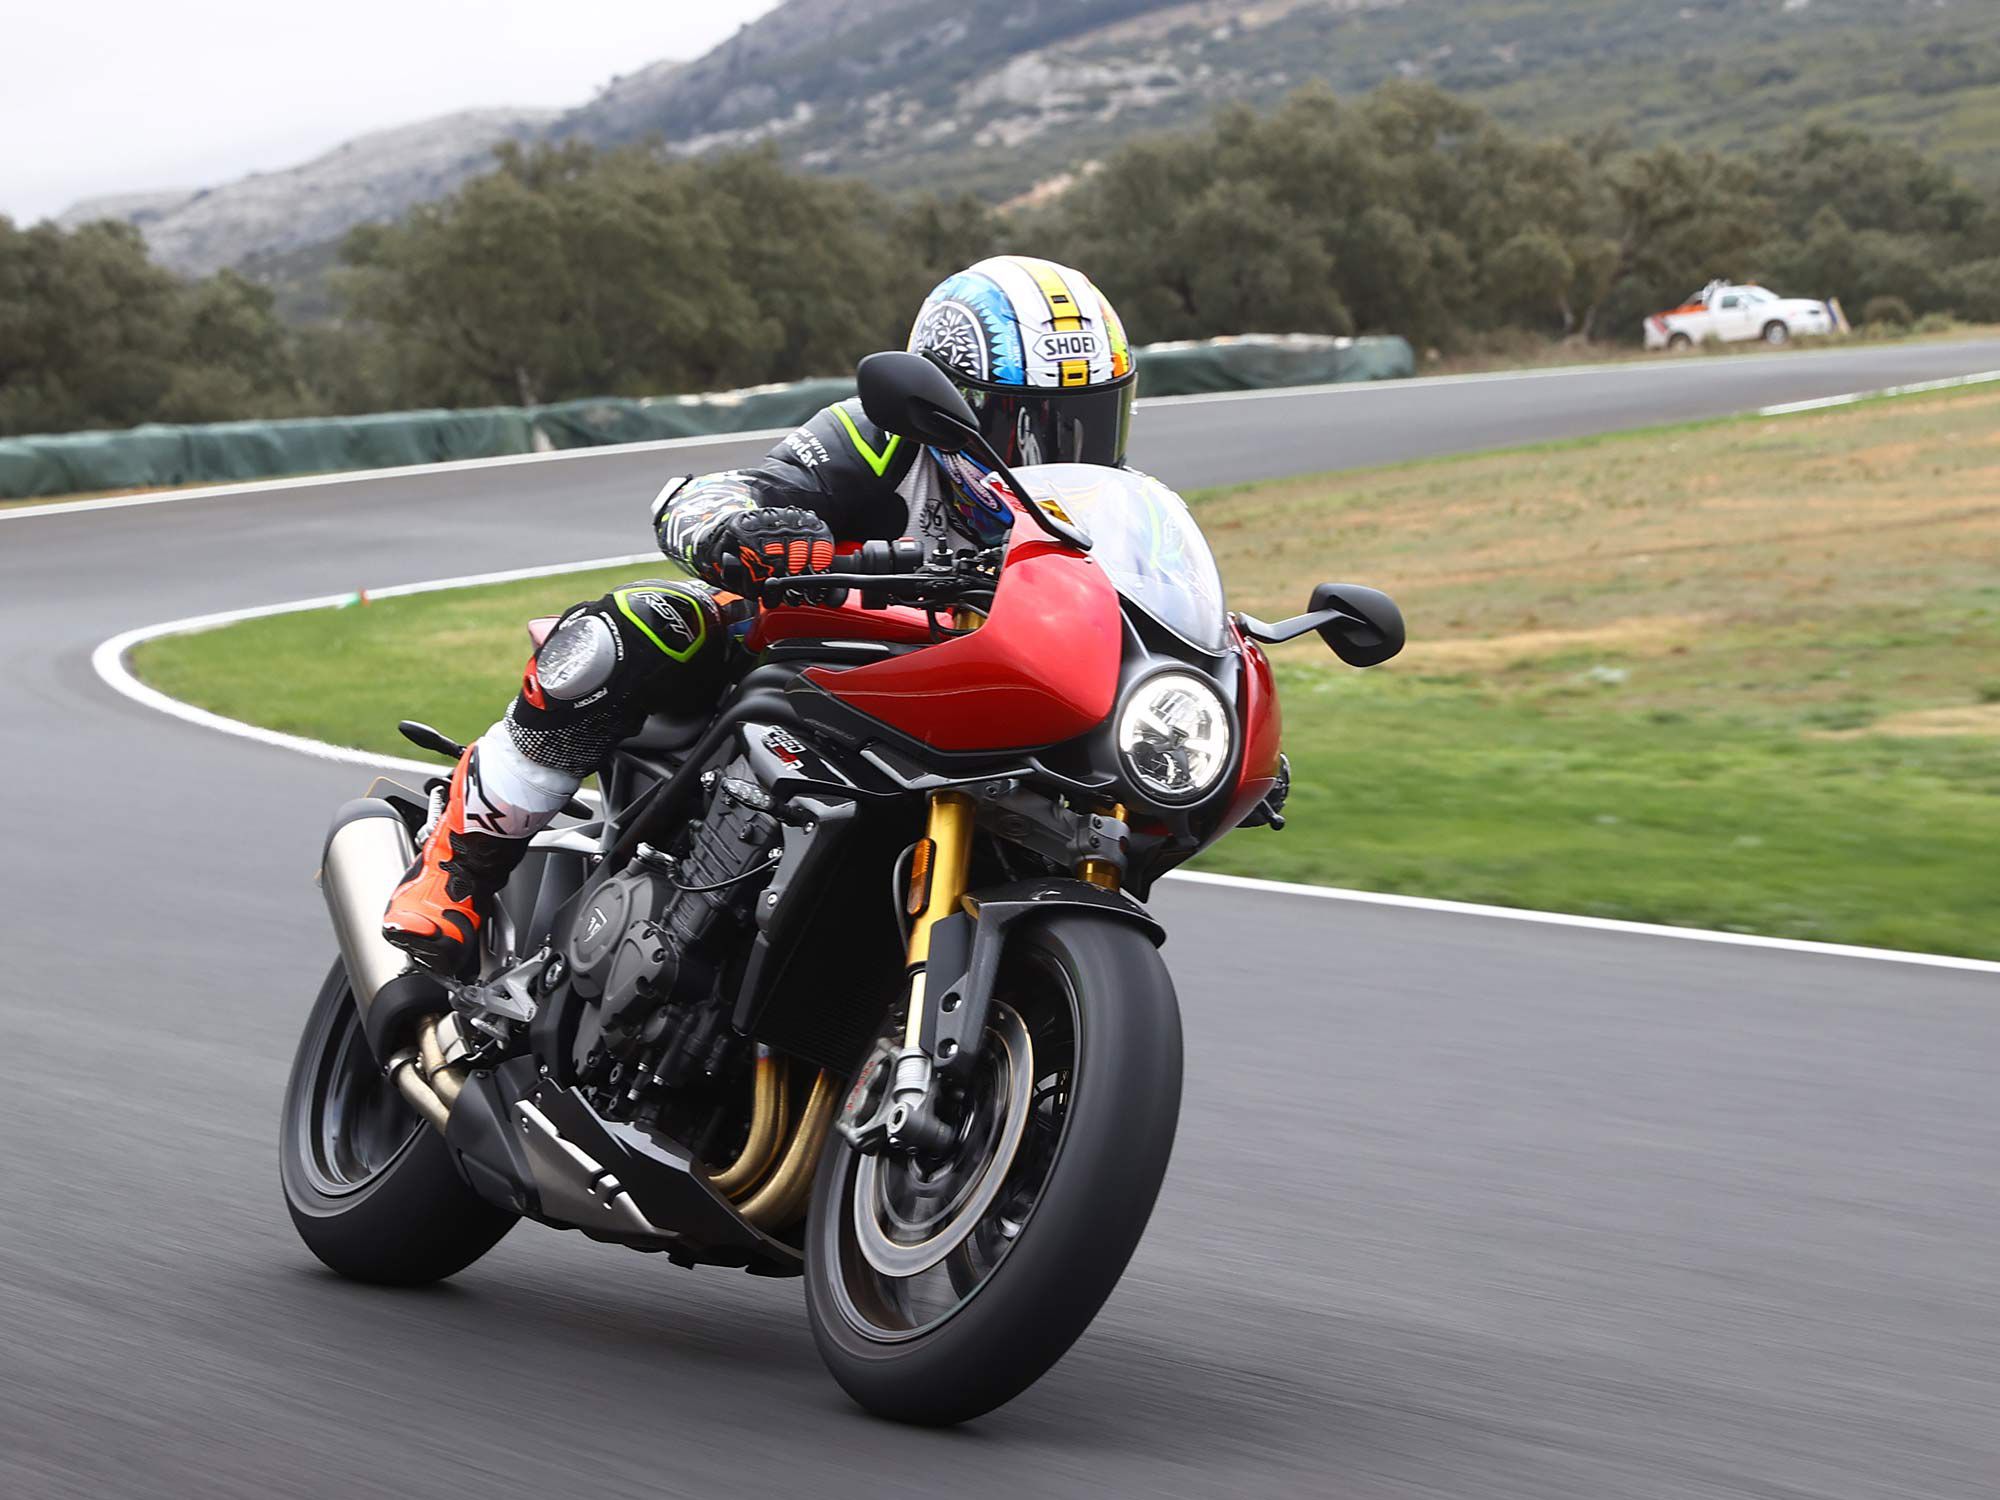 New Öhlins smart EC 2.0 electronically adjustable semi-active system replaces the manually adjustable units on the RS. The Öhlins single shock rear is also semi-active, with both ends having 4.7 inches of travel.